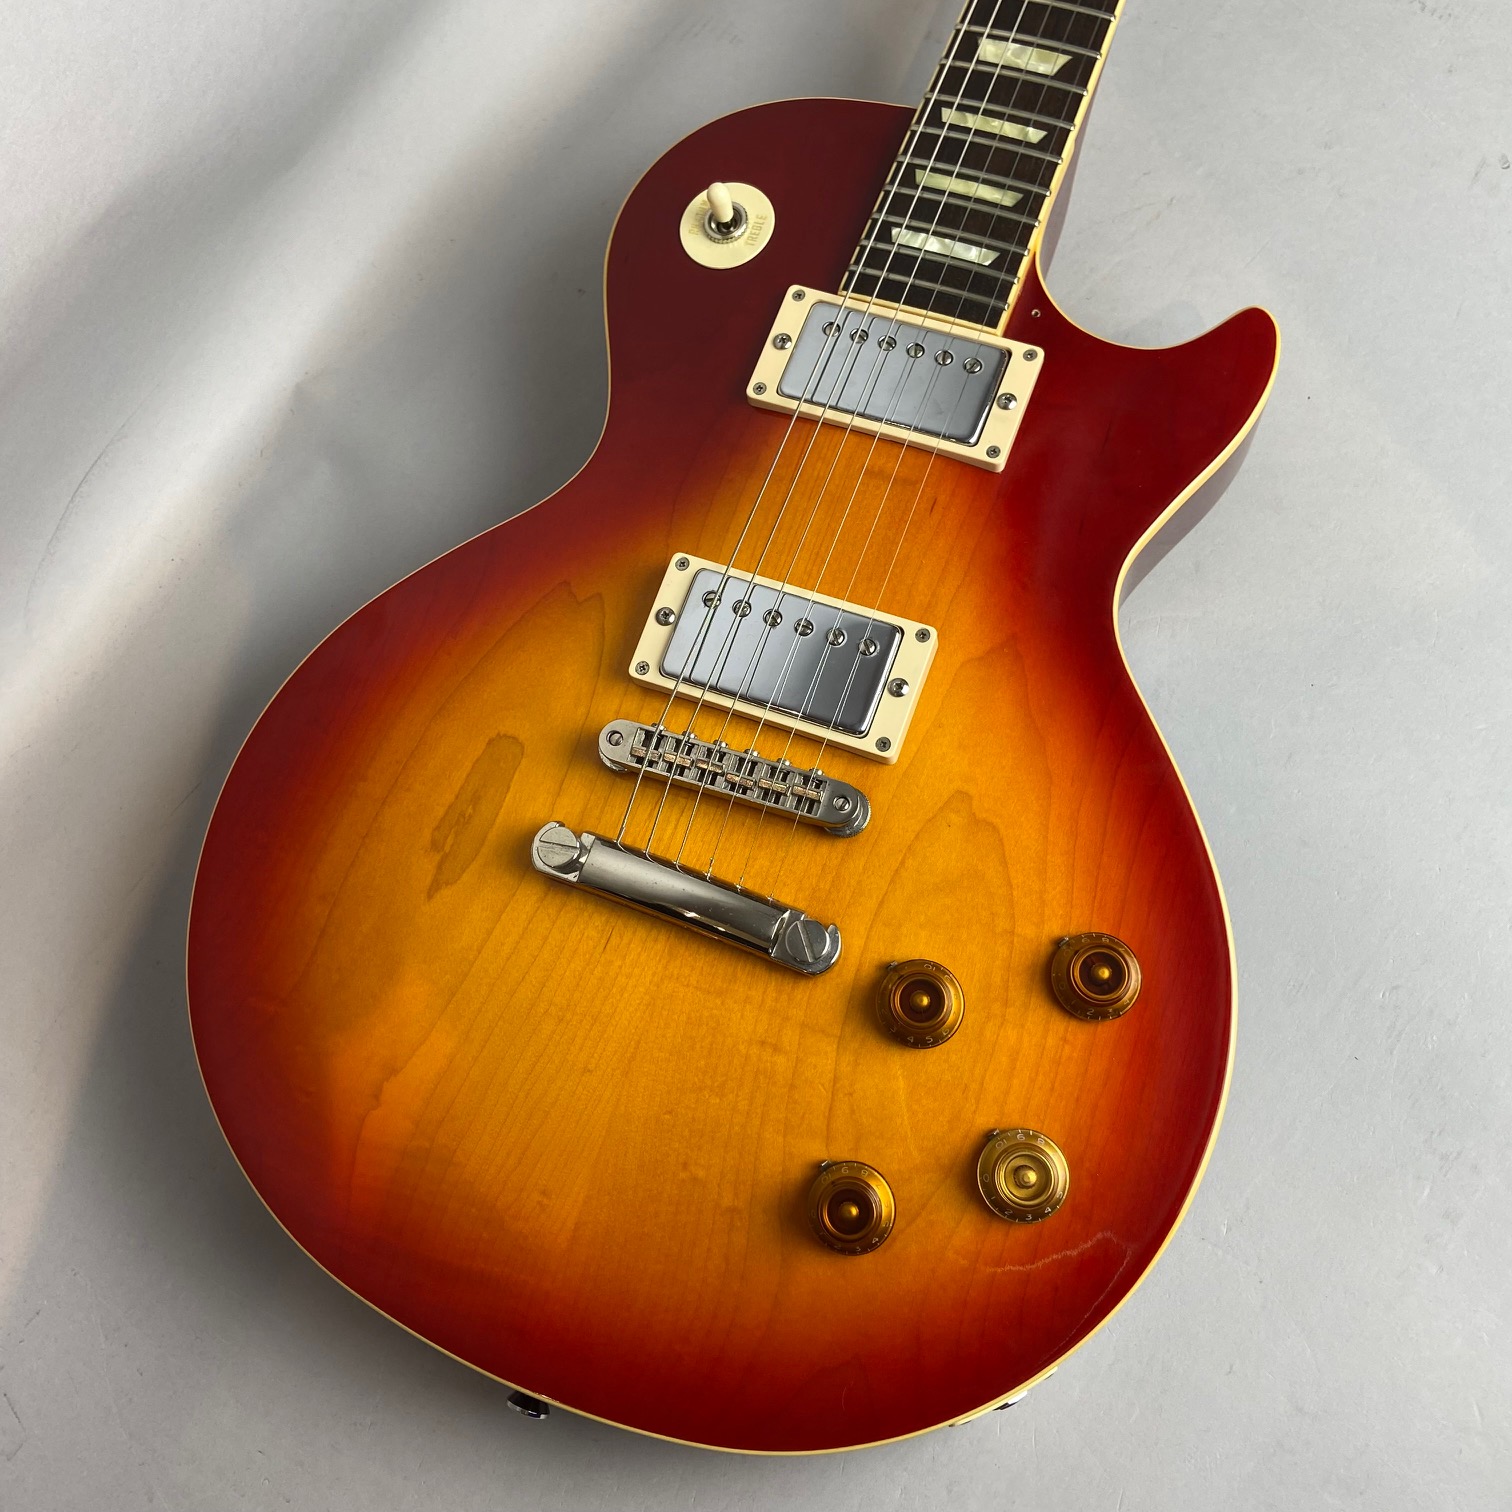 orville by gibson Les Paul Standard10枚目に追加しました